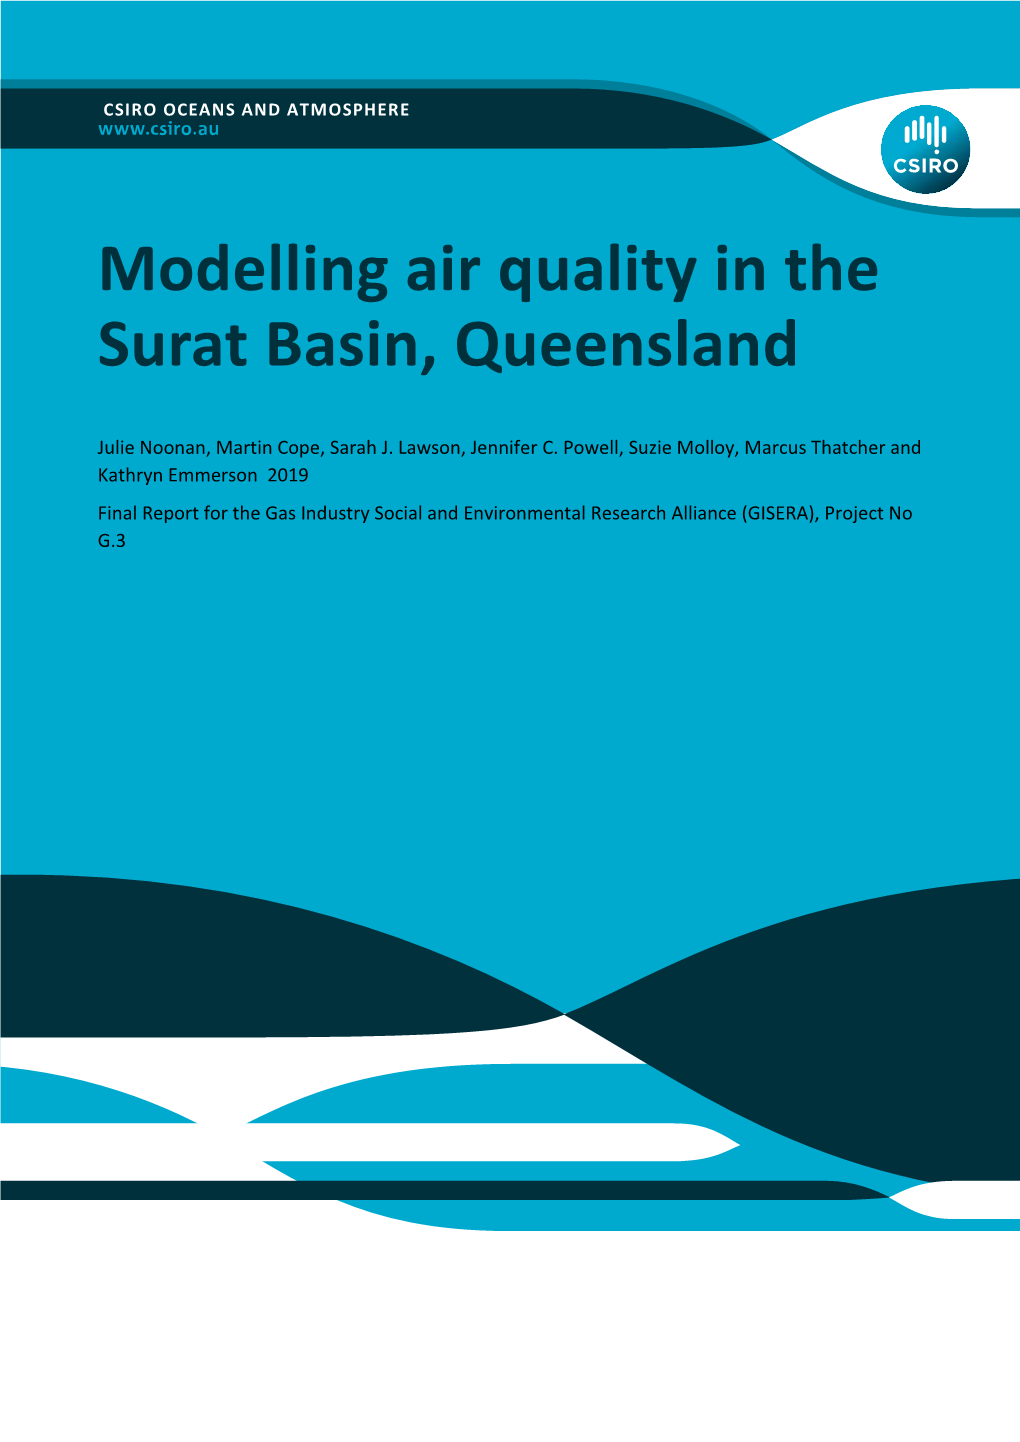 Modelling Air Quality in the Surat Basin, Queensland PDF 15 MB